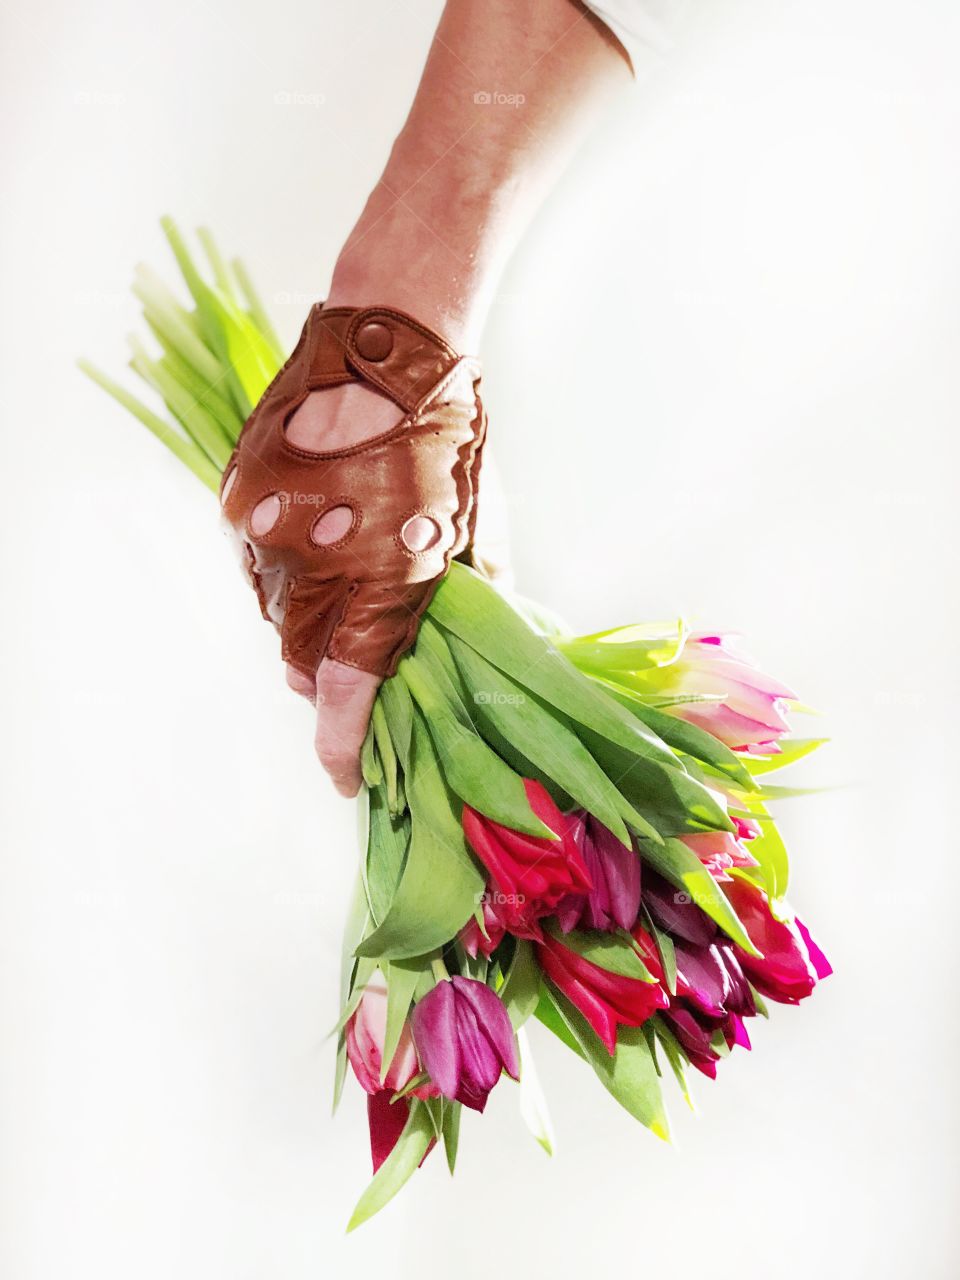 Men's hand in a glove holds a bouquet of colored tulips.